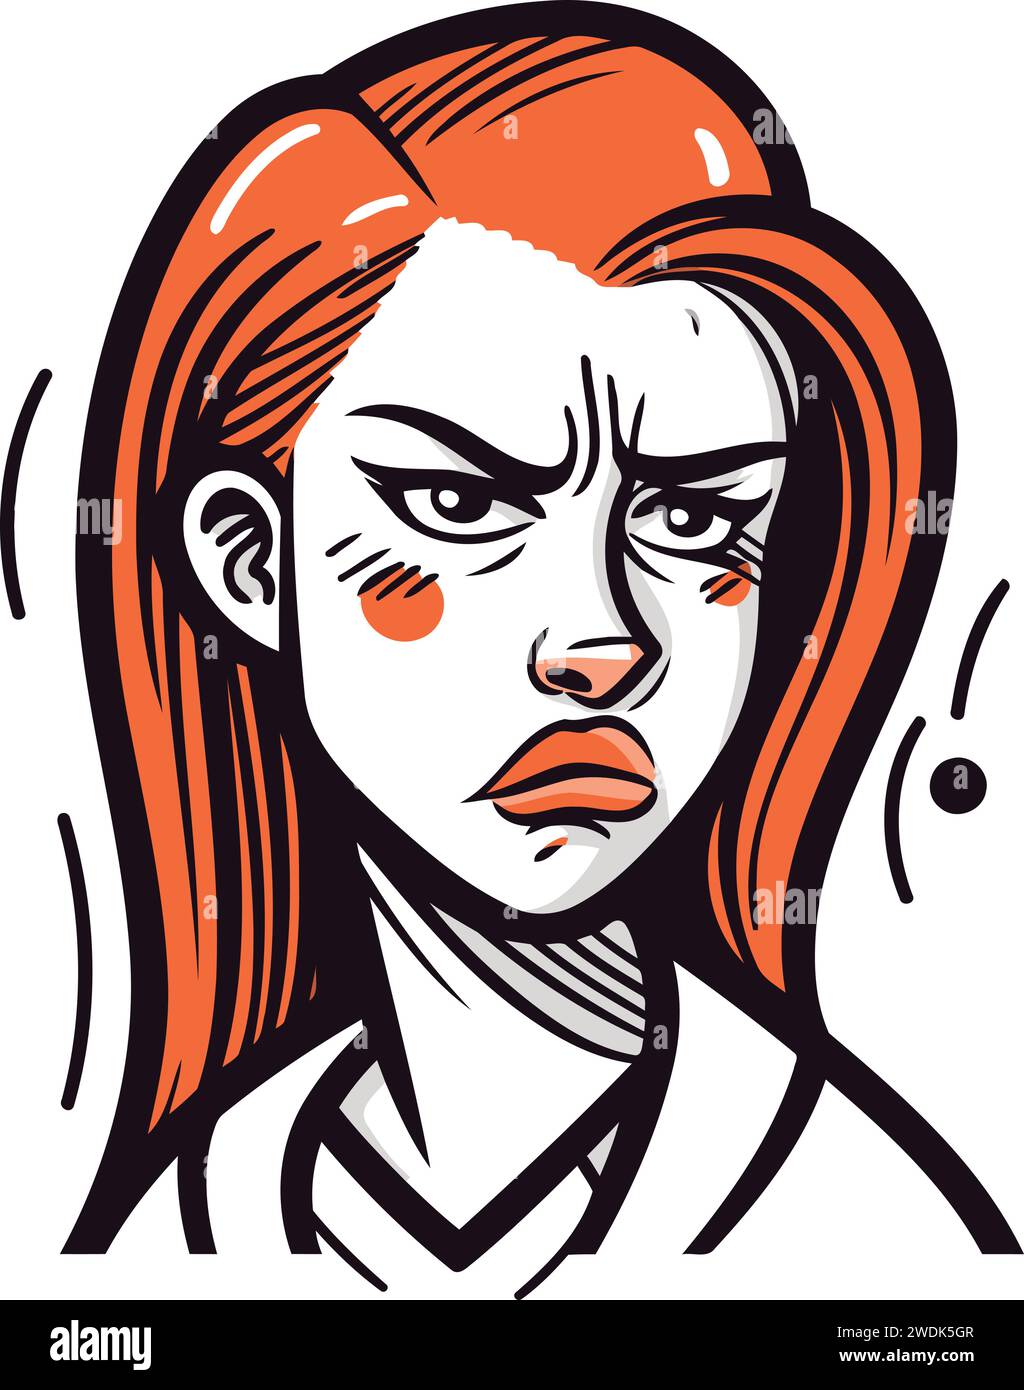 Angry woman face. Vector illustration of a female face with red hair. Stock Vector